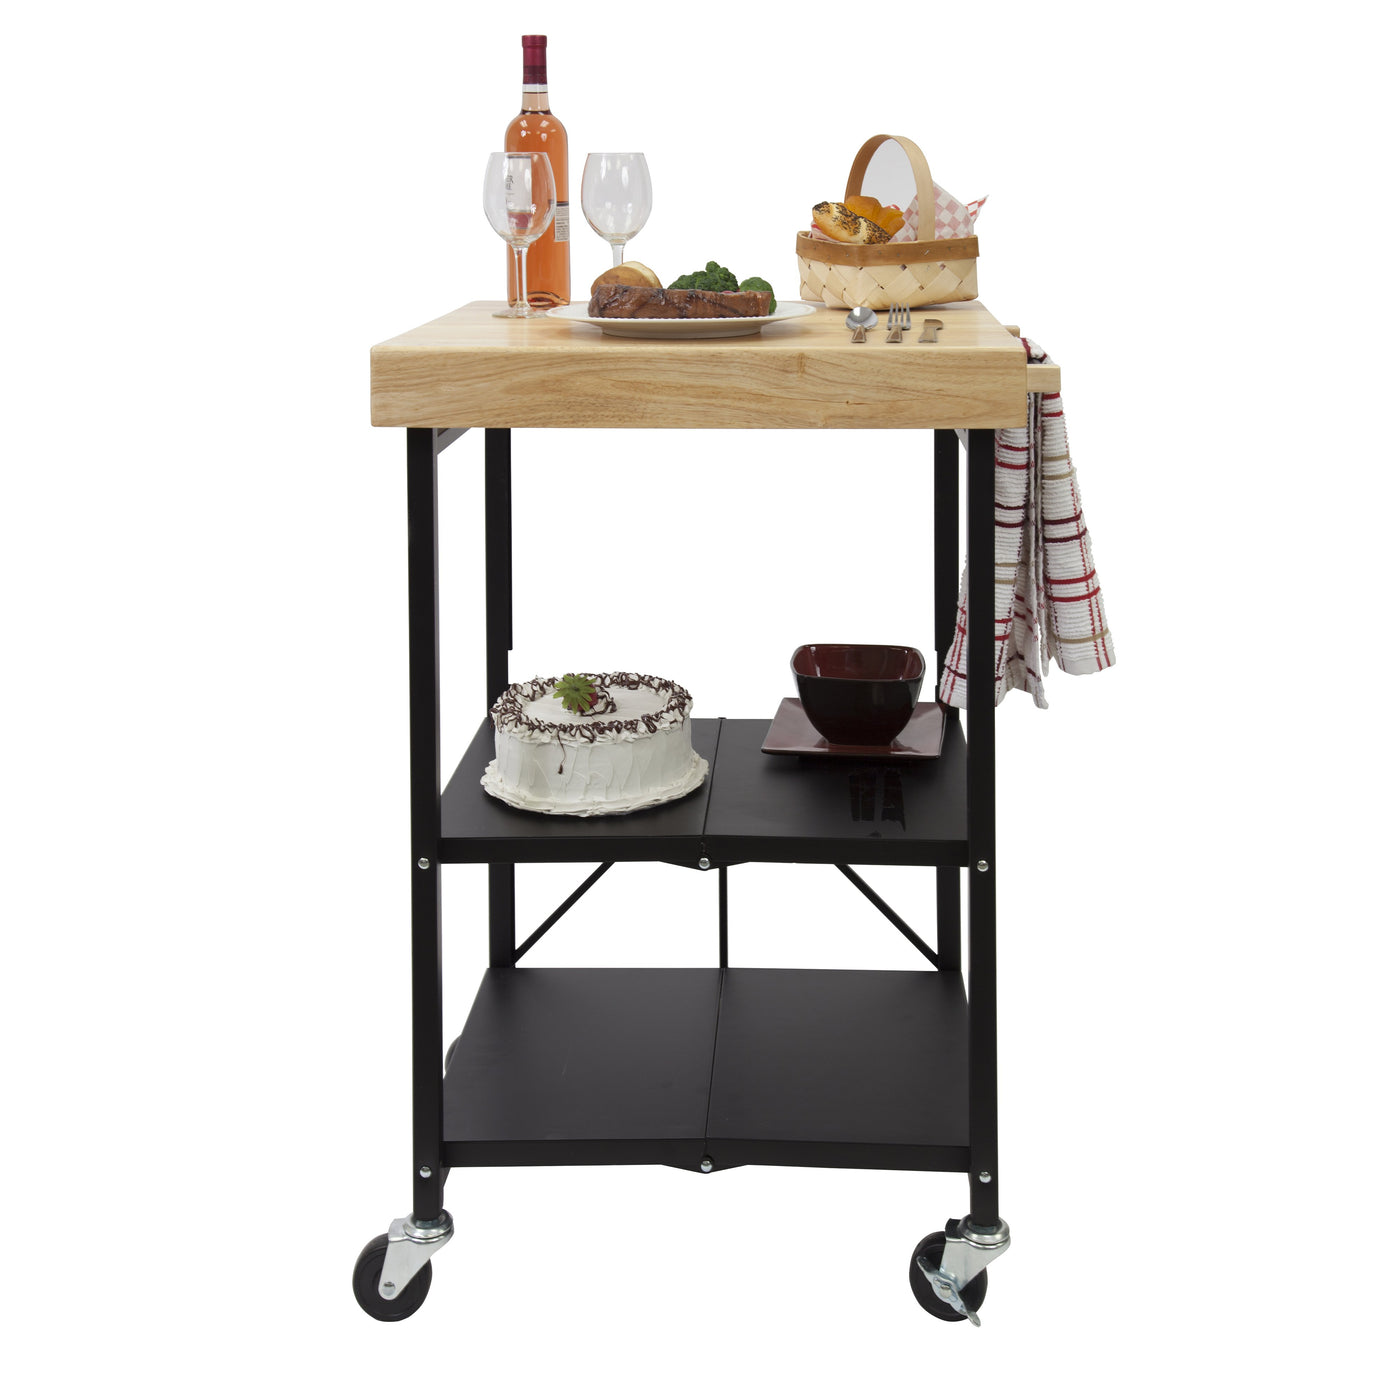 Foldout 3-Tier Kitchen Serving Island Cart With Wheels